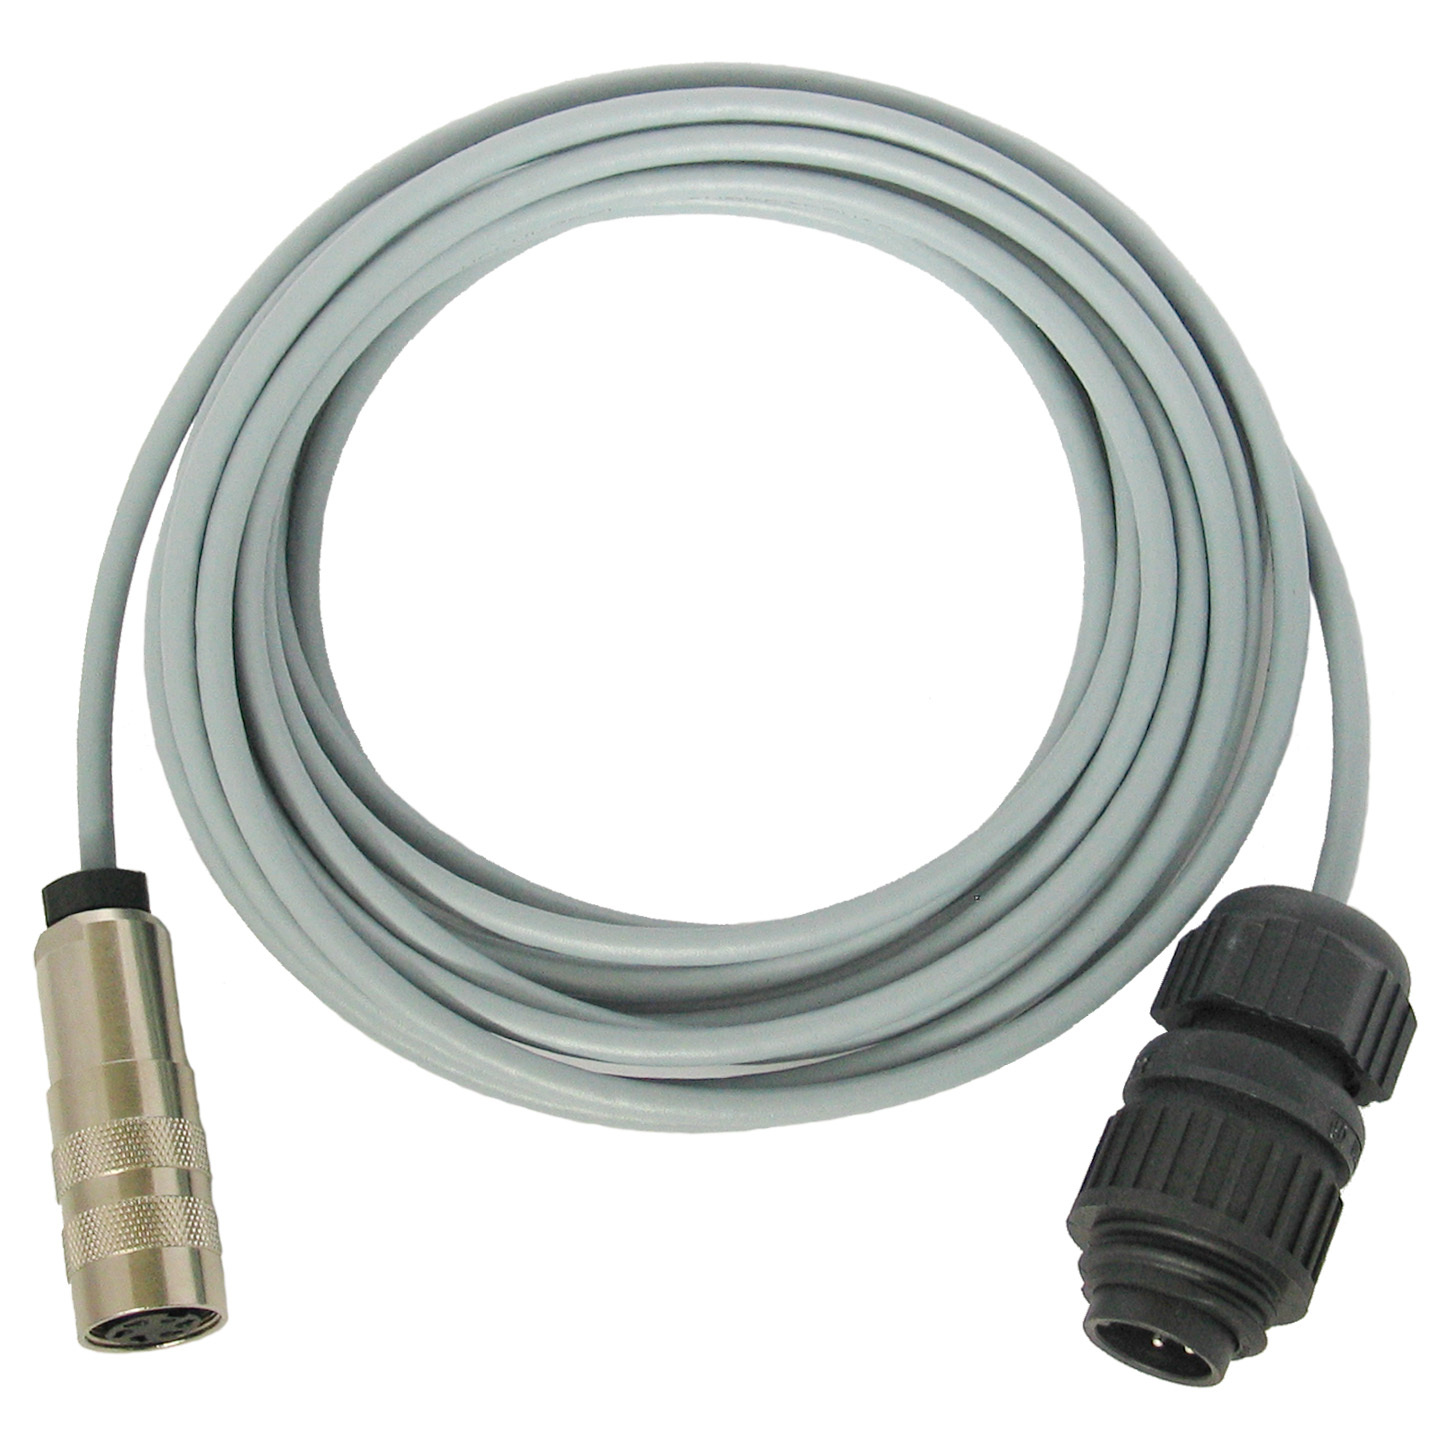 Connecting cable for external pressure sensor length 10 m